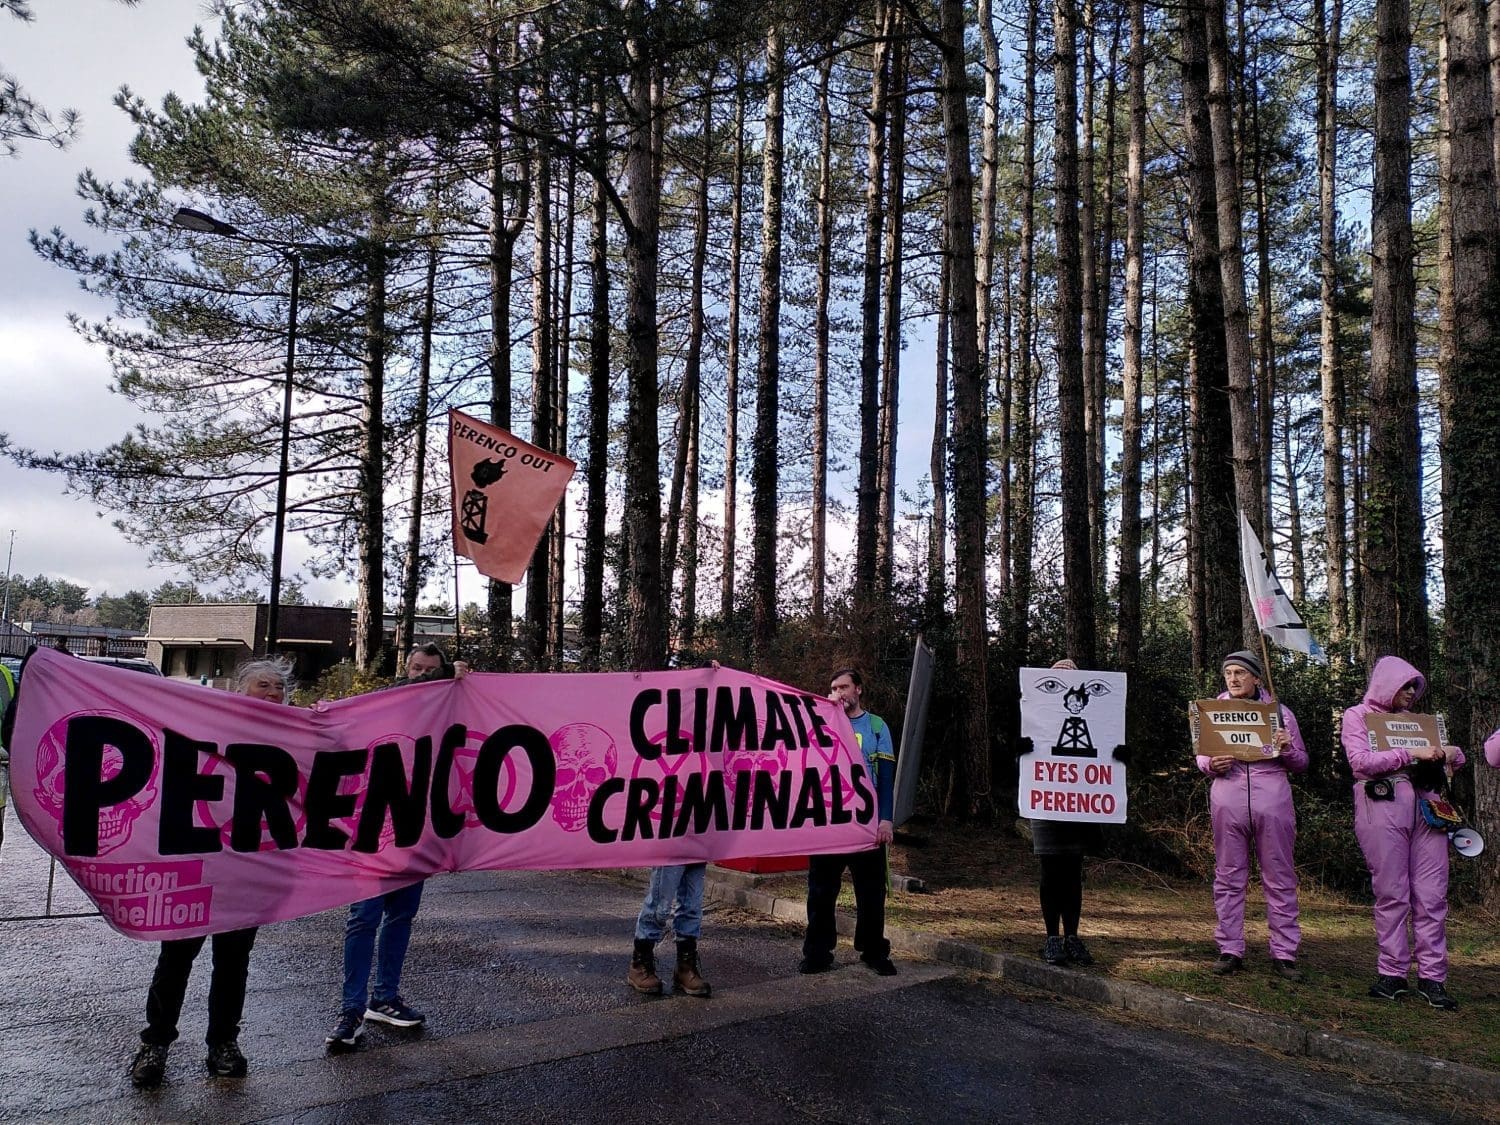 Activists block Wytch Farm's main entrance with placards and banners. One reads: "Perenco Climate Criminals" while another states: "Eyes on Perenco".